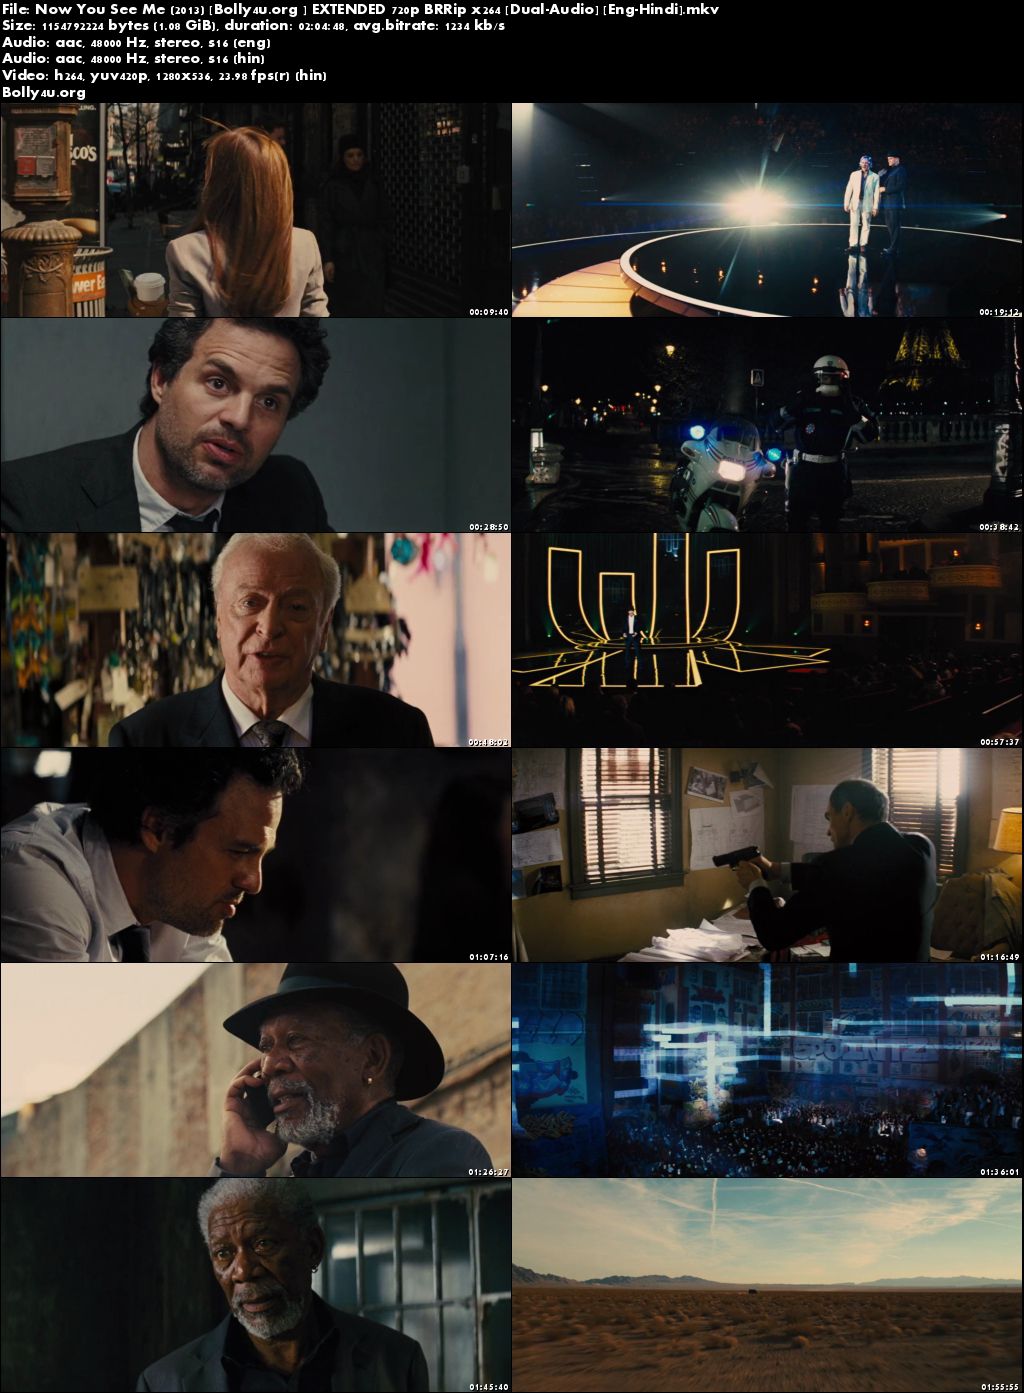 Now You See Me 2013 BRRip 480p EXTENDED Dual Audio 350Mb Download